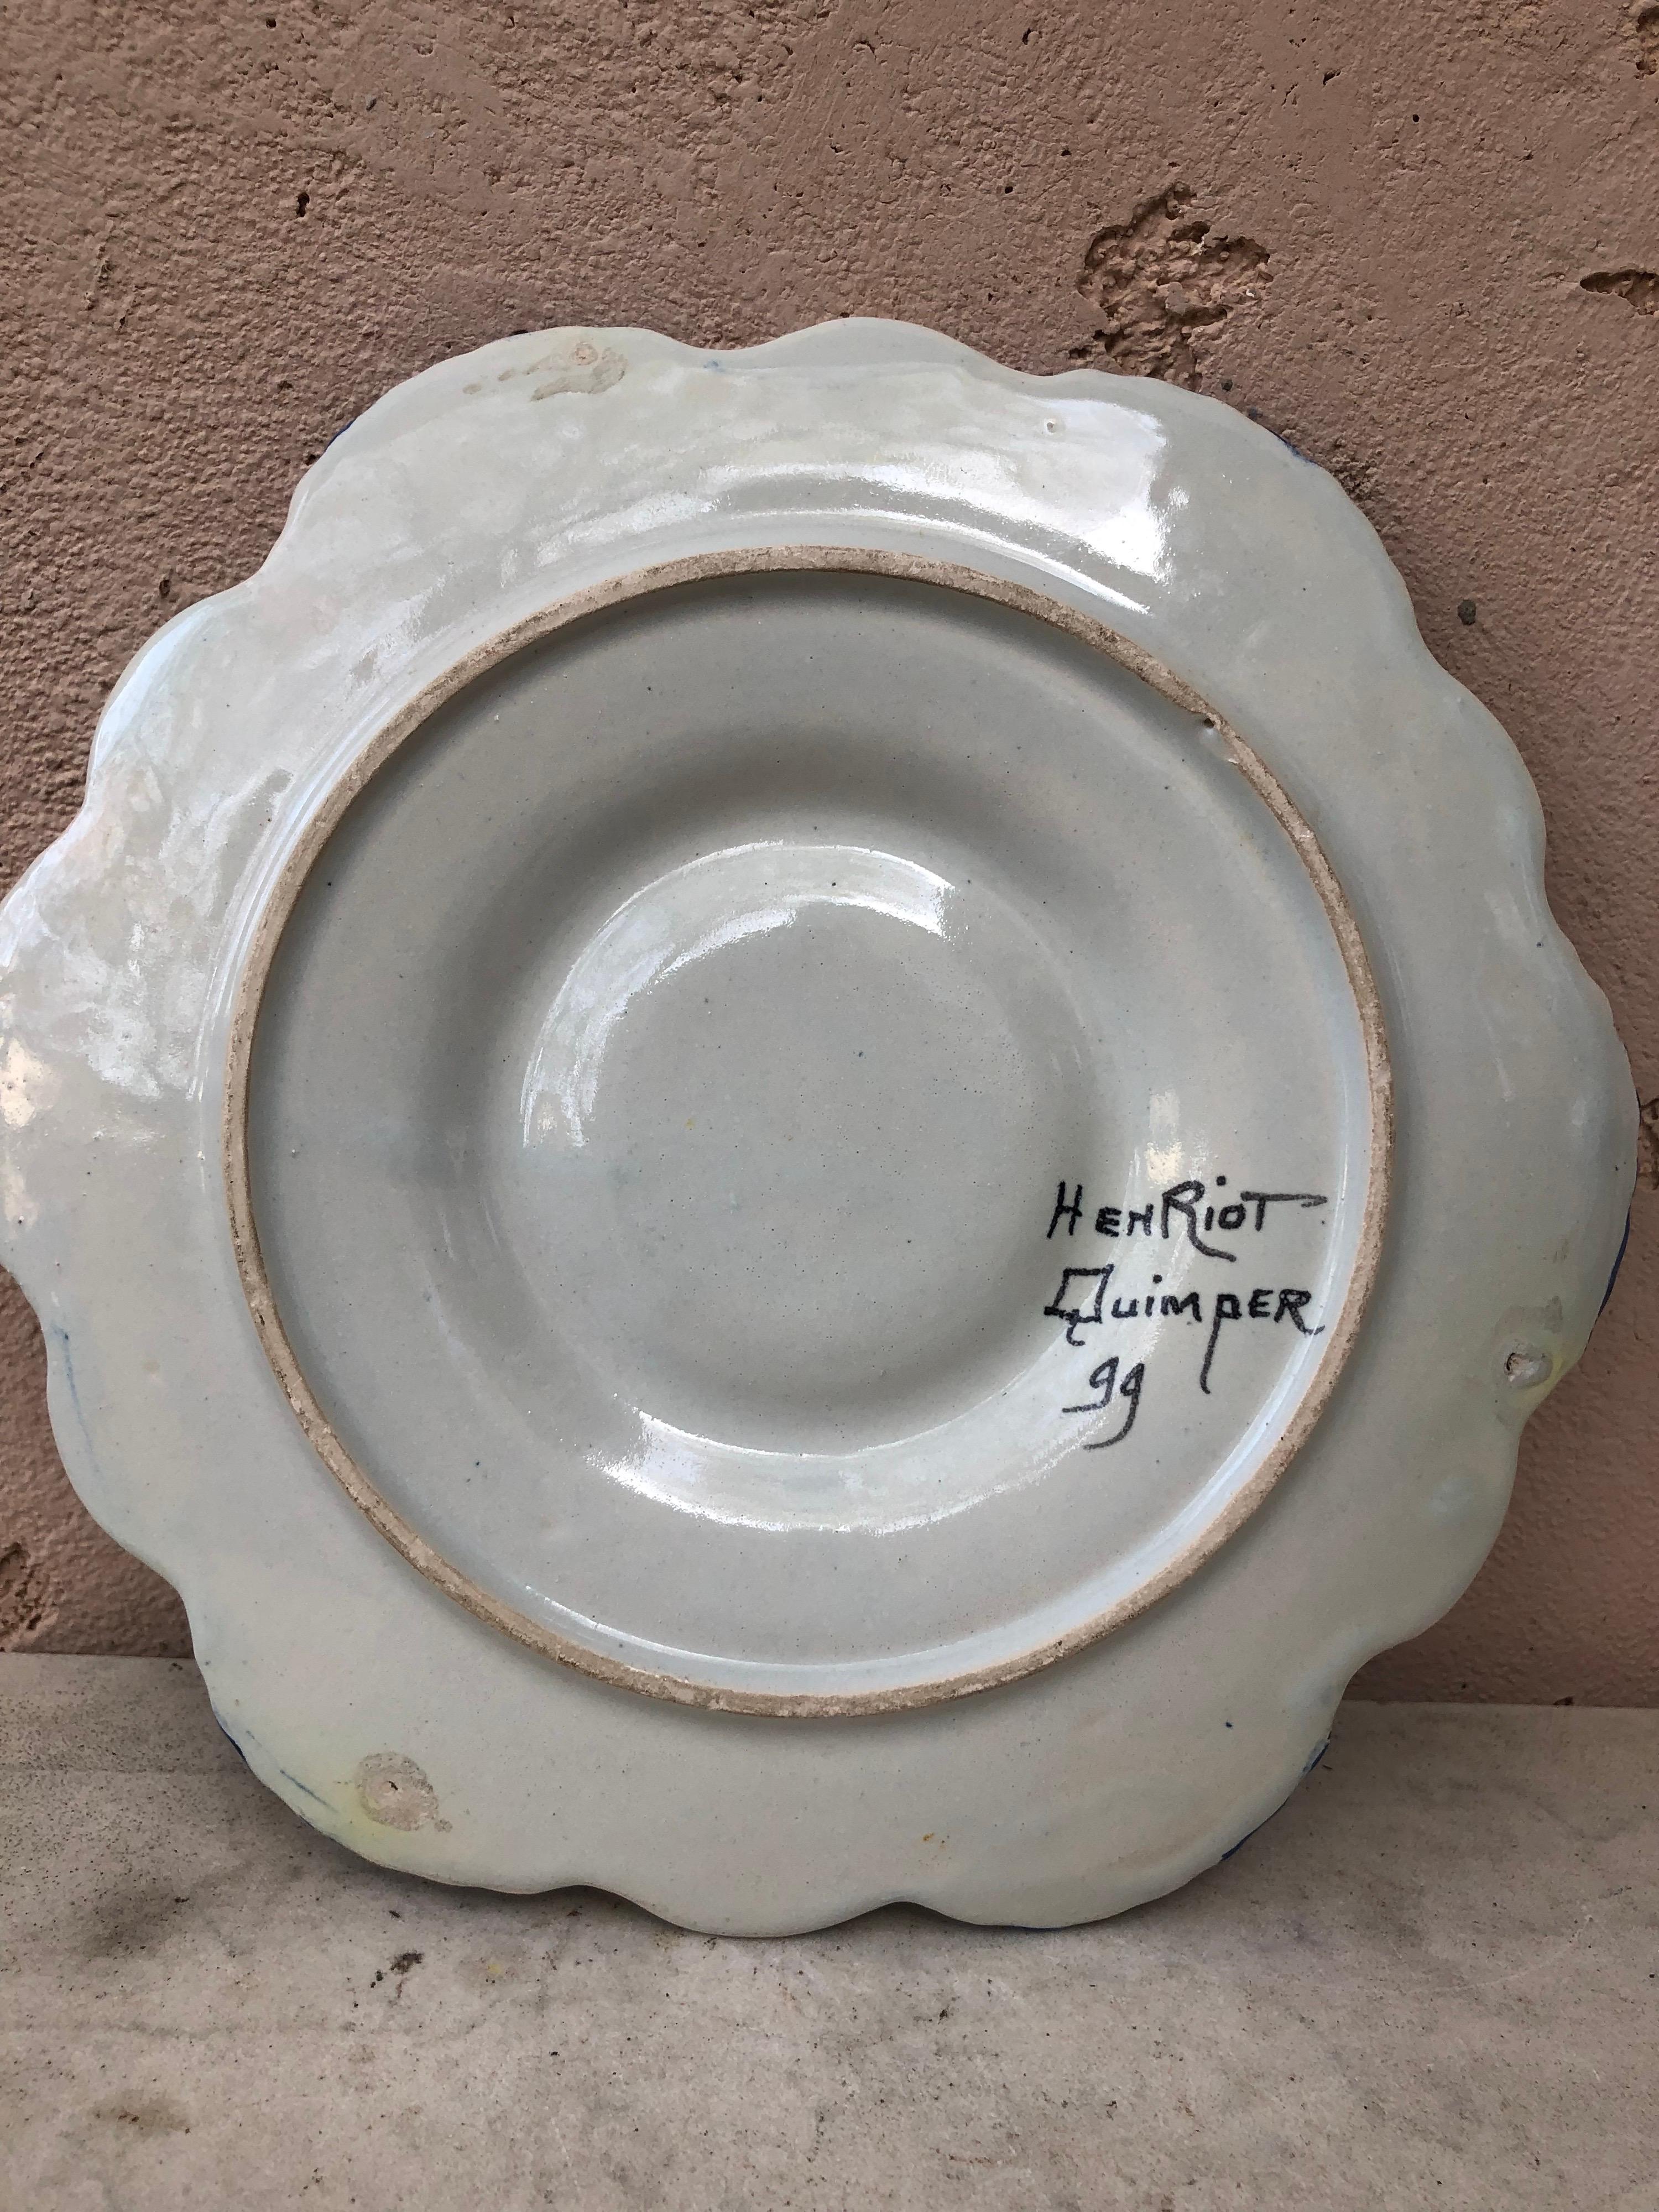 Rustic French Faience Oyster Plate Henriot Quimper, circa 1930 For Sale